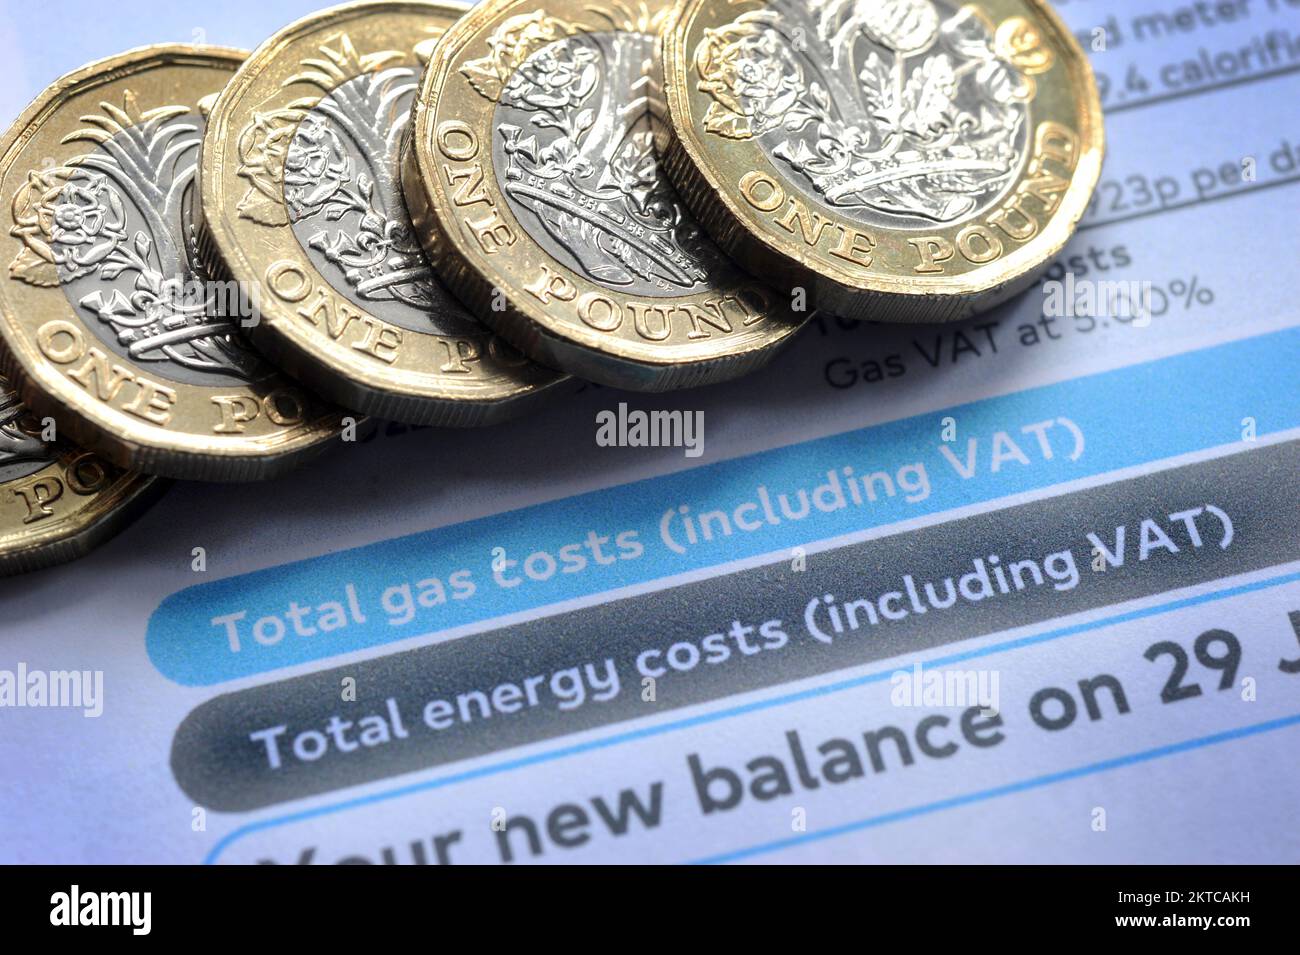 ENERGY BILL WITH ONE POUND COINS RE ELECTRIC BILLS GAS COSTS PRICES COST OF LIVING CRISIS HEATING ETC UK Stock Photo